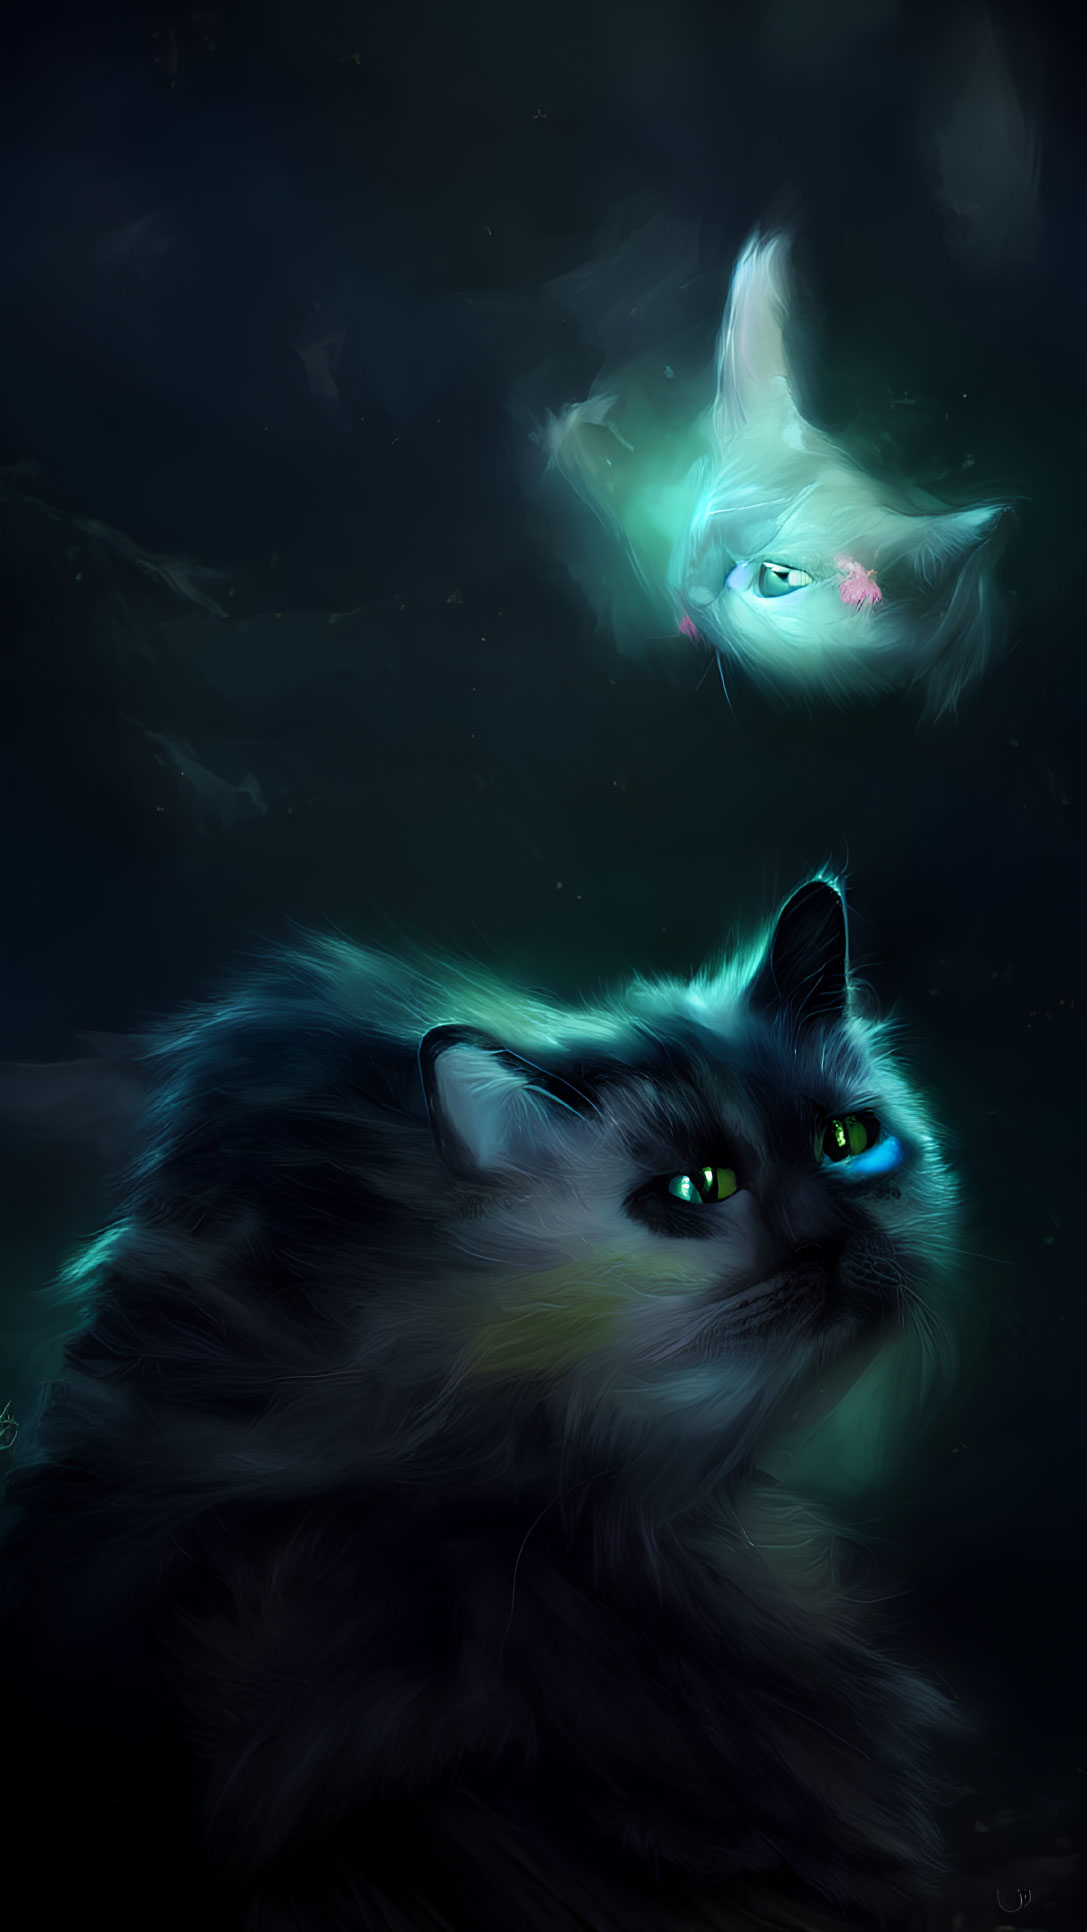 Digital Artwork: Two Cats with Glowing Eyes, One Grounded, One Translucent in Sky